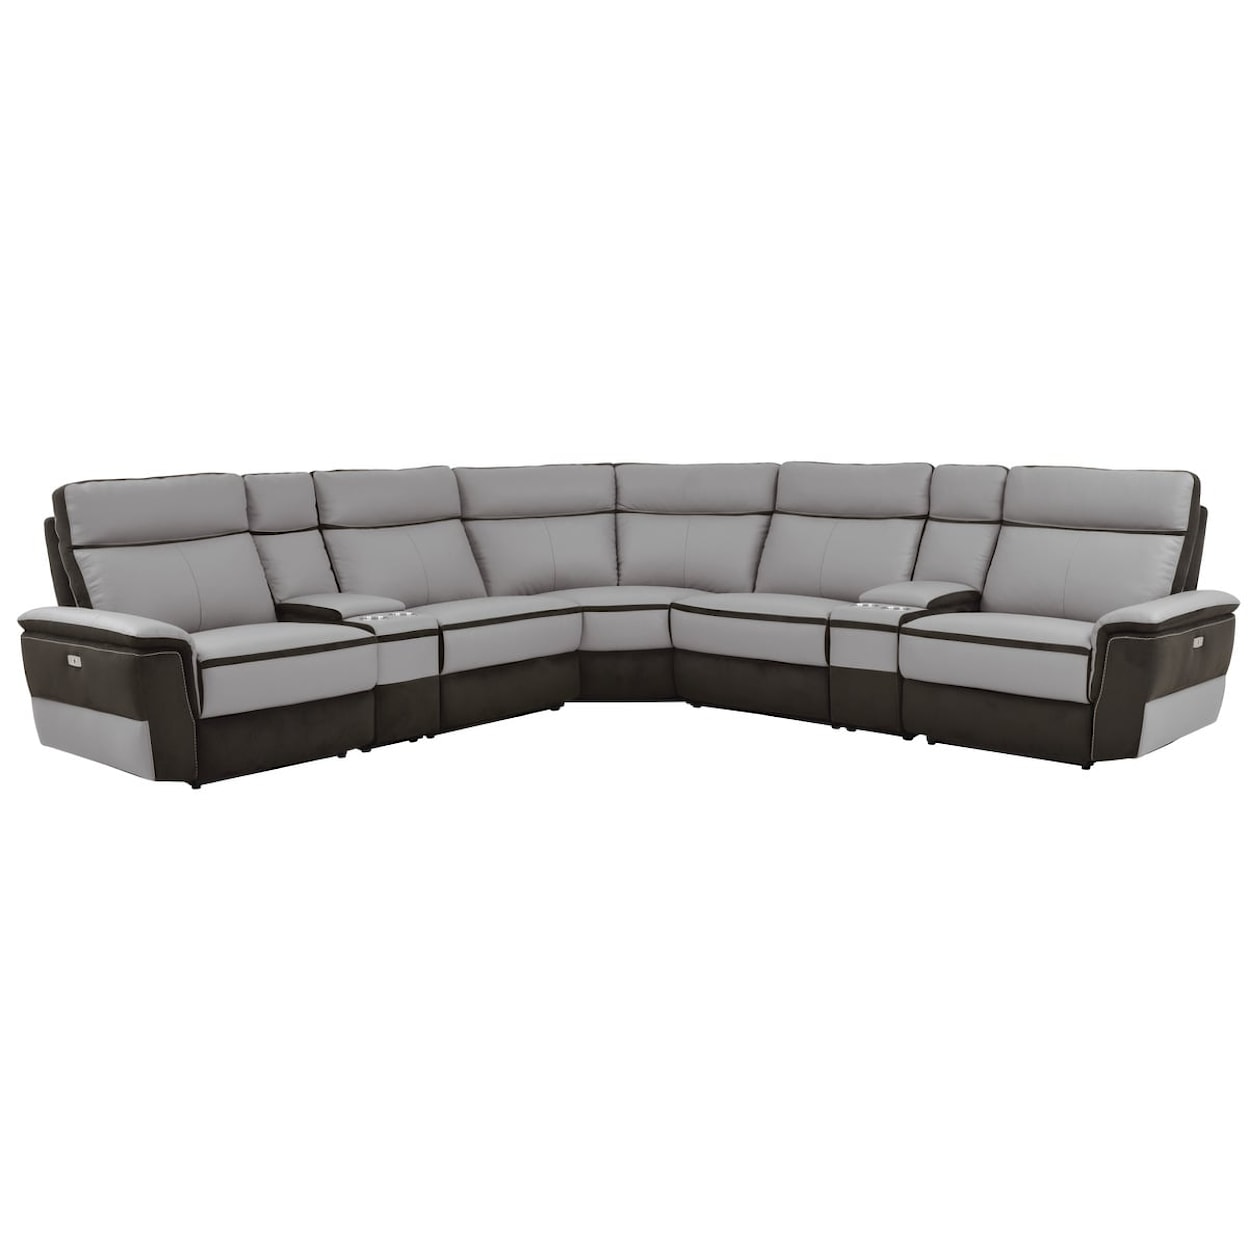 Homelegance Laertes 7-Piece Power Reclining Sectional Sofa